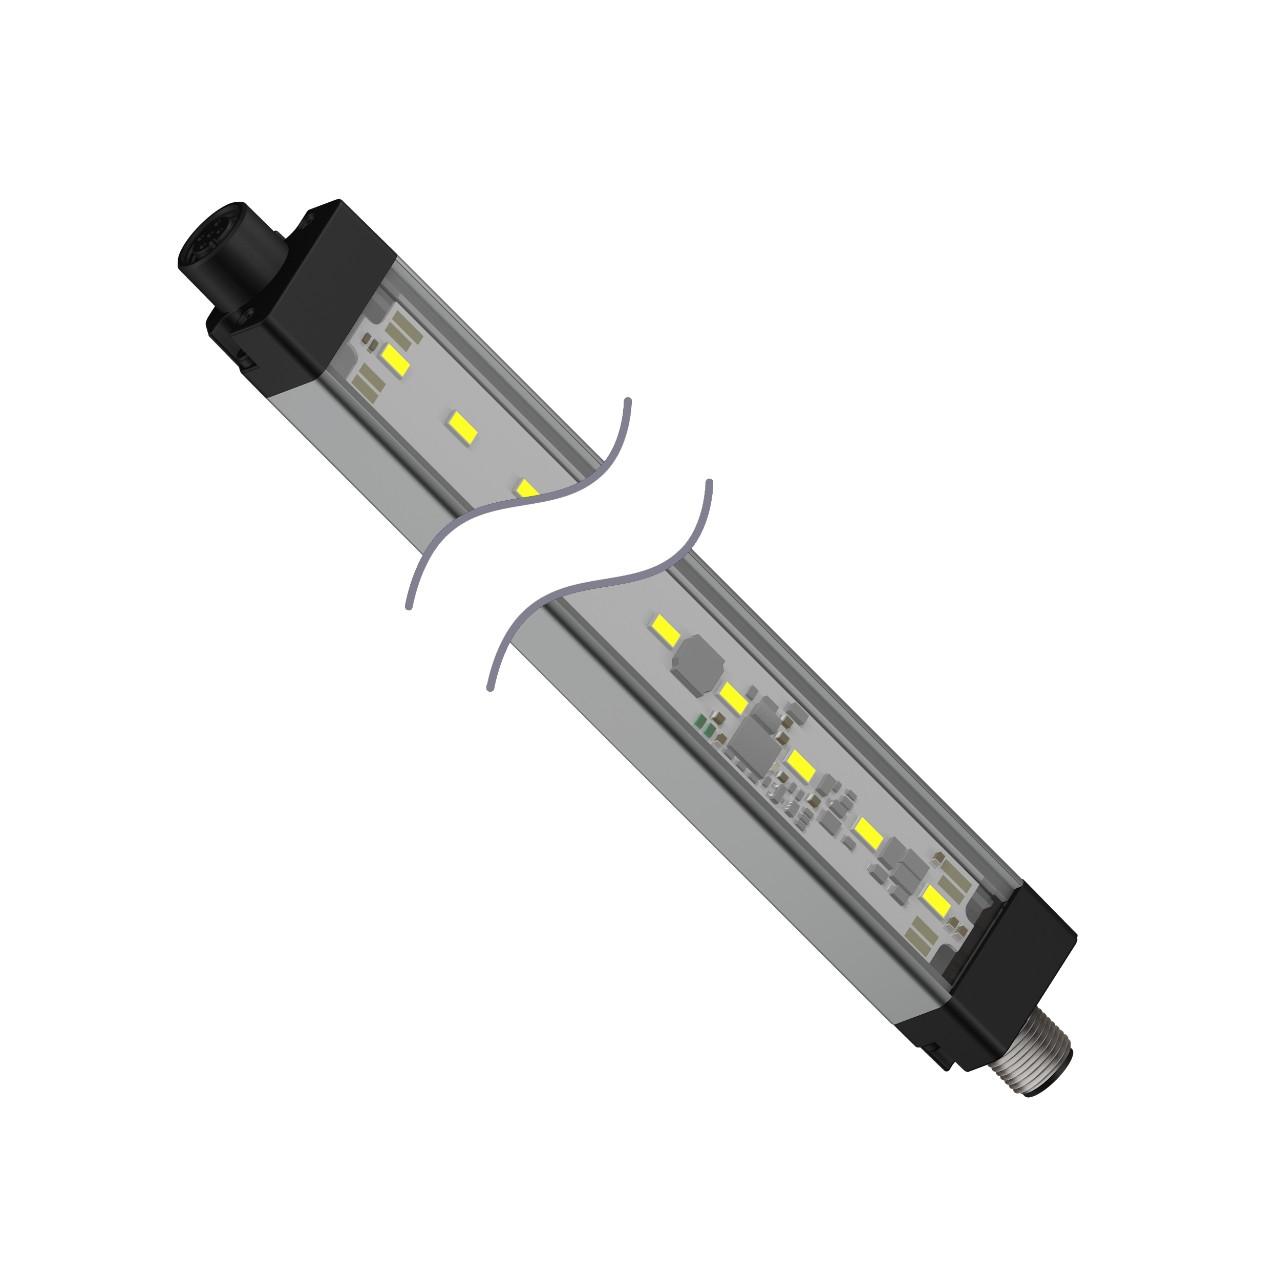 Banner WLS28-2CW430DXQ WLS28-2 Work Light Strip; Diffuse Window; Length: 430 mm, Voltage: 12-30 V dc; Environmental Rating: IP50, Color: White; Cascadable, Euro 4-pin Quick-Disconnect